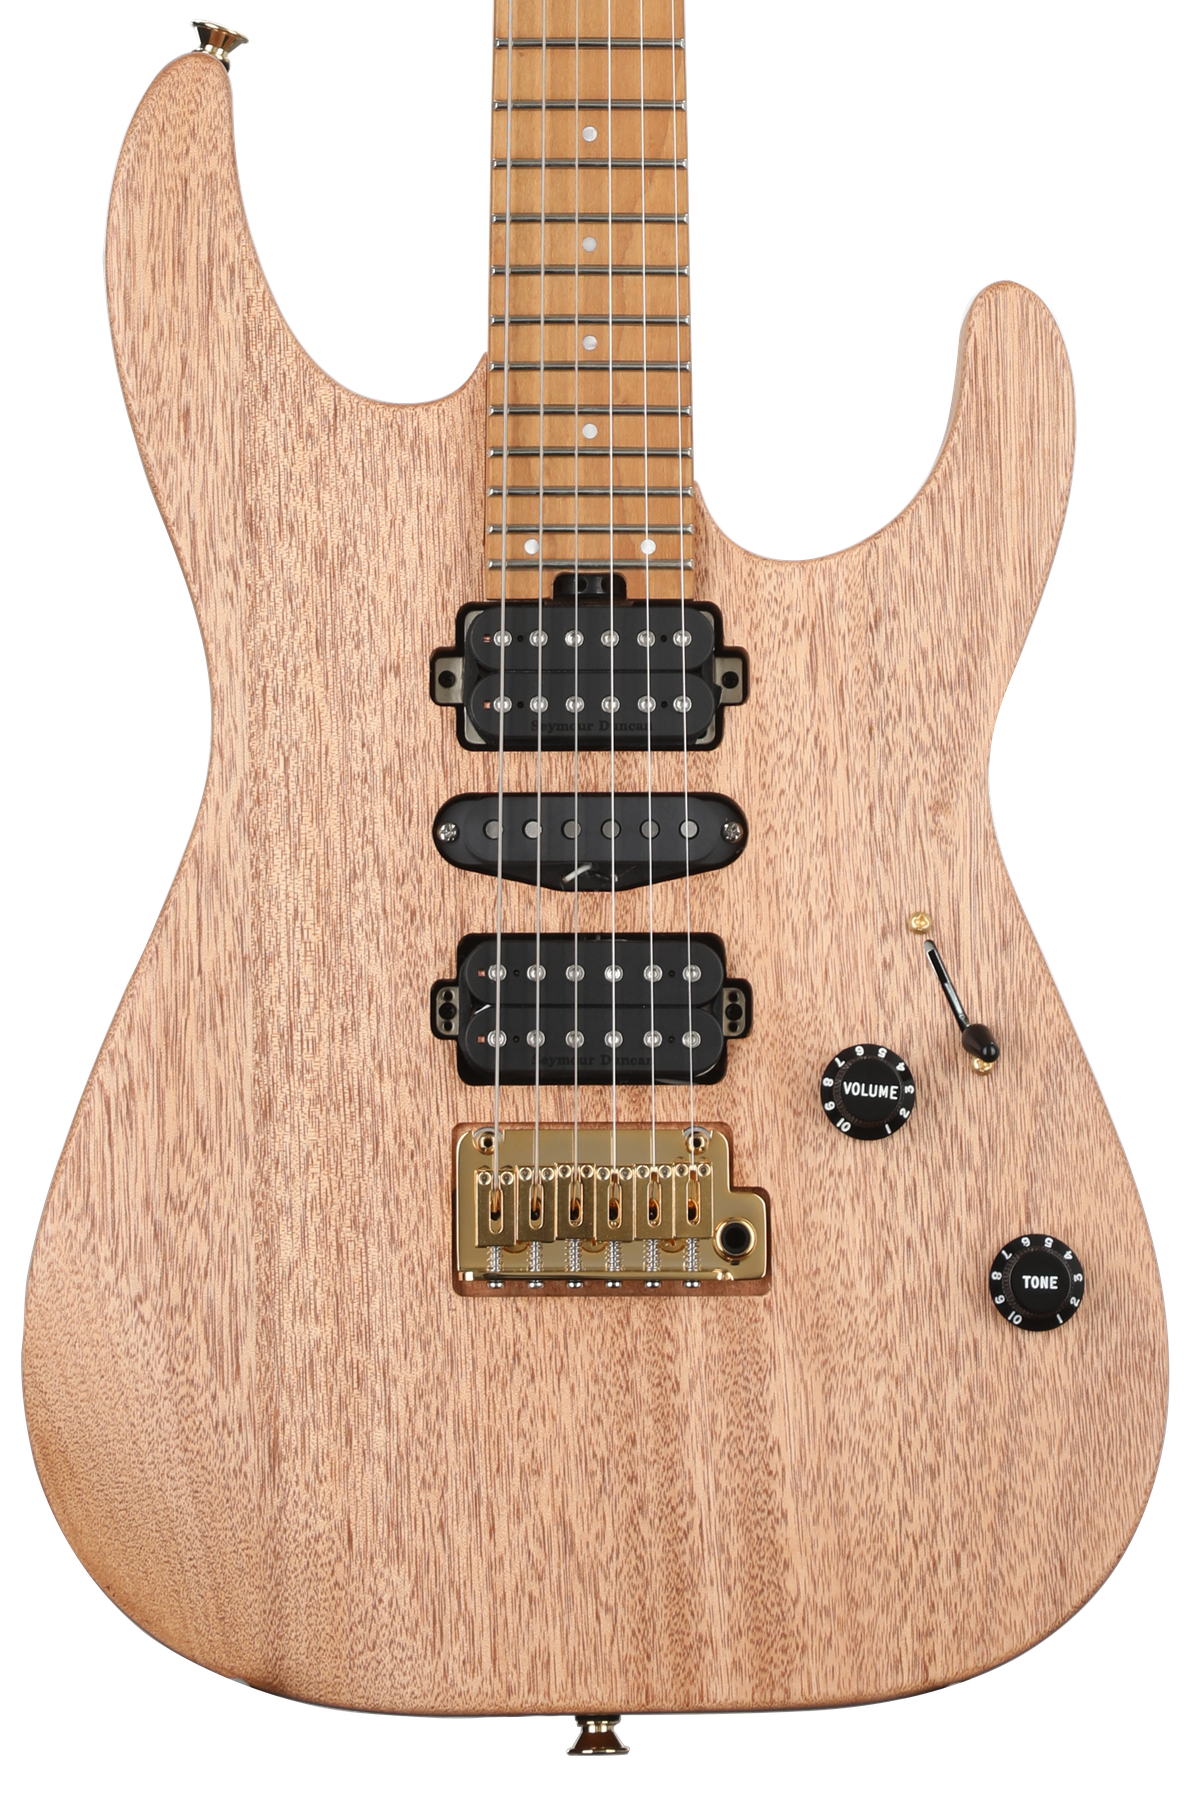 Charvel Pro-Mod DK24 HSH Electric Guitar - Natural | Sweetwater